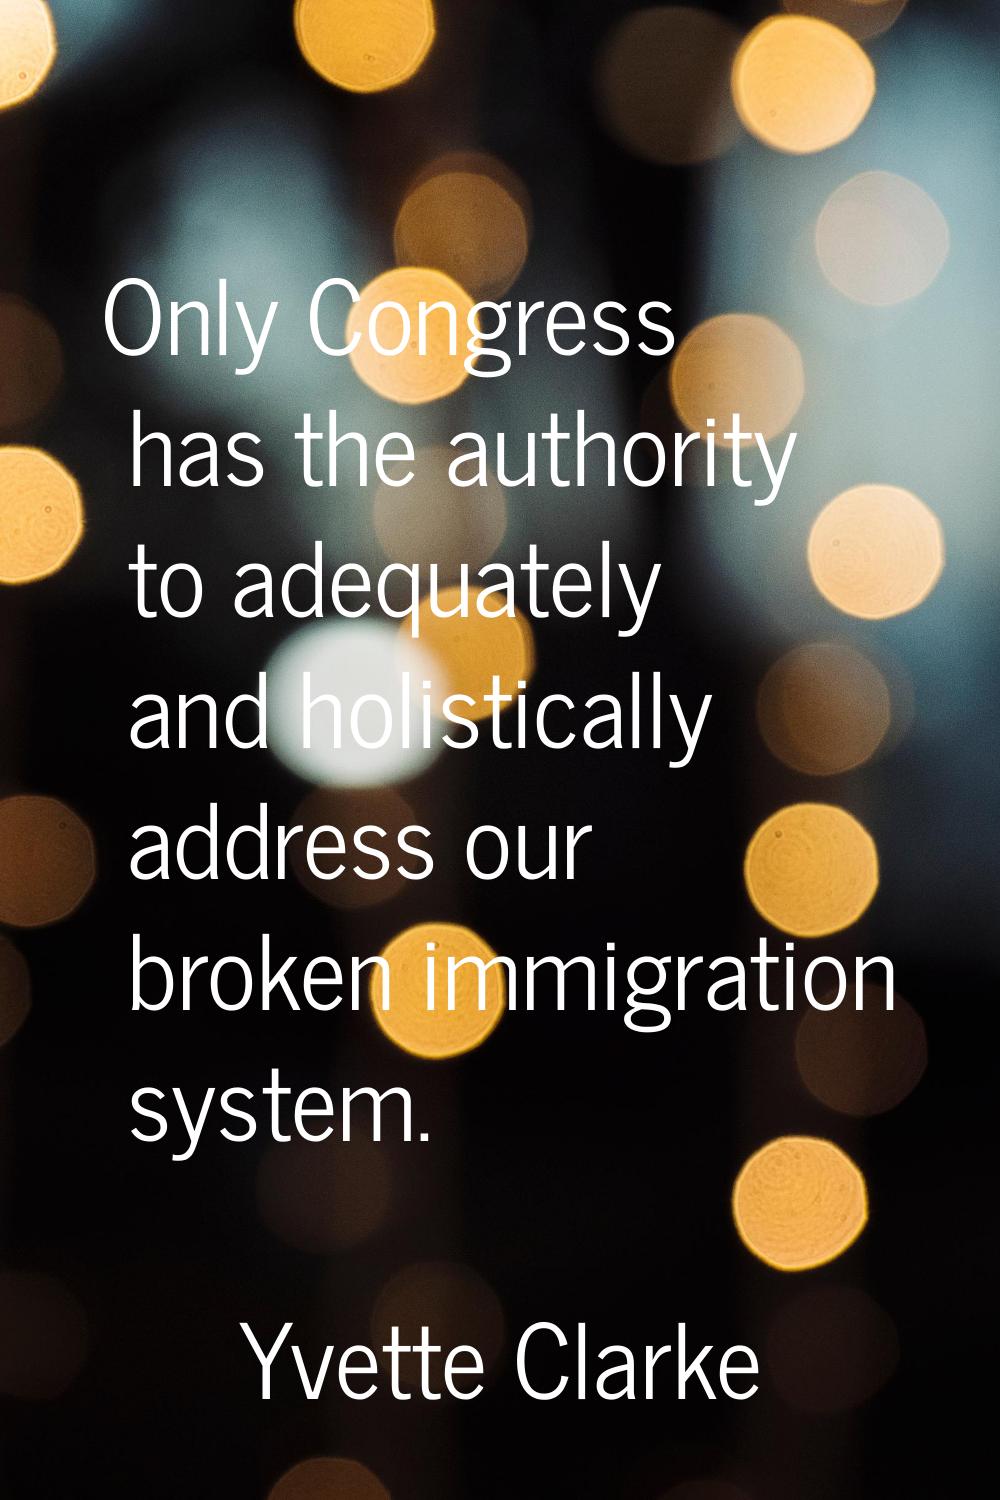 Only Congress has the authority to adequately and holistically address our broken immigration syste